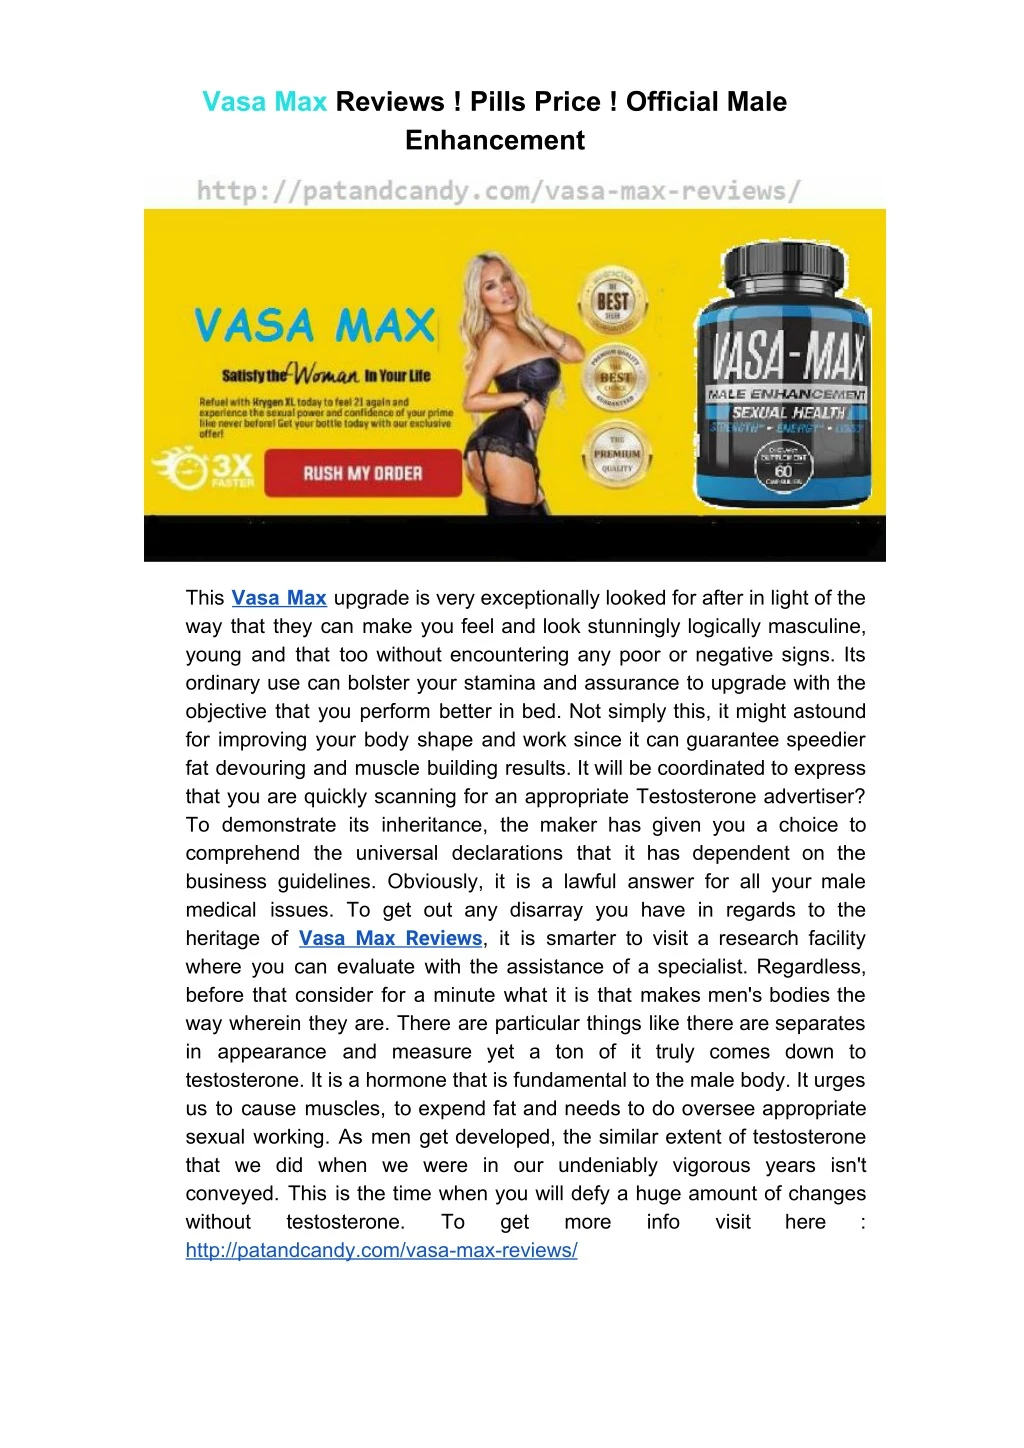 vasa max reviews pills price official male